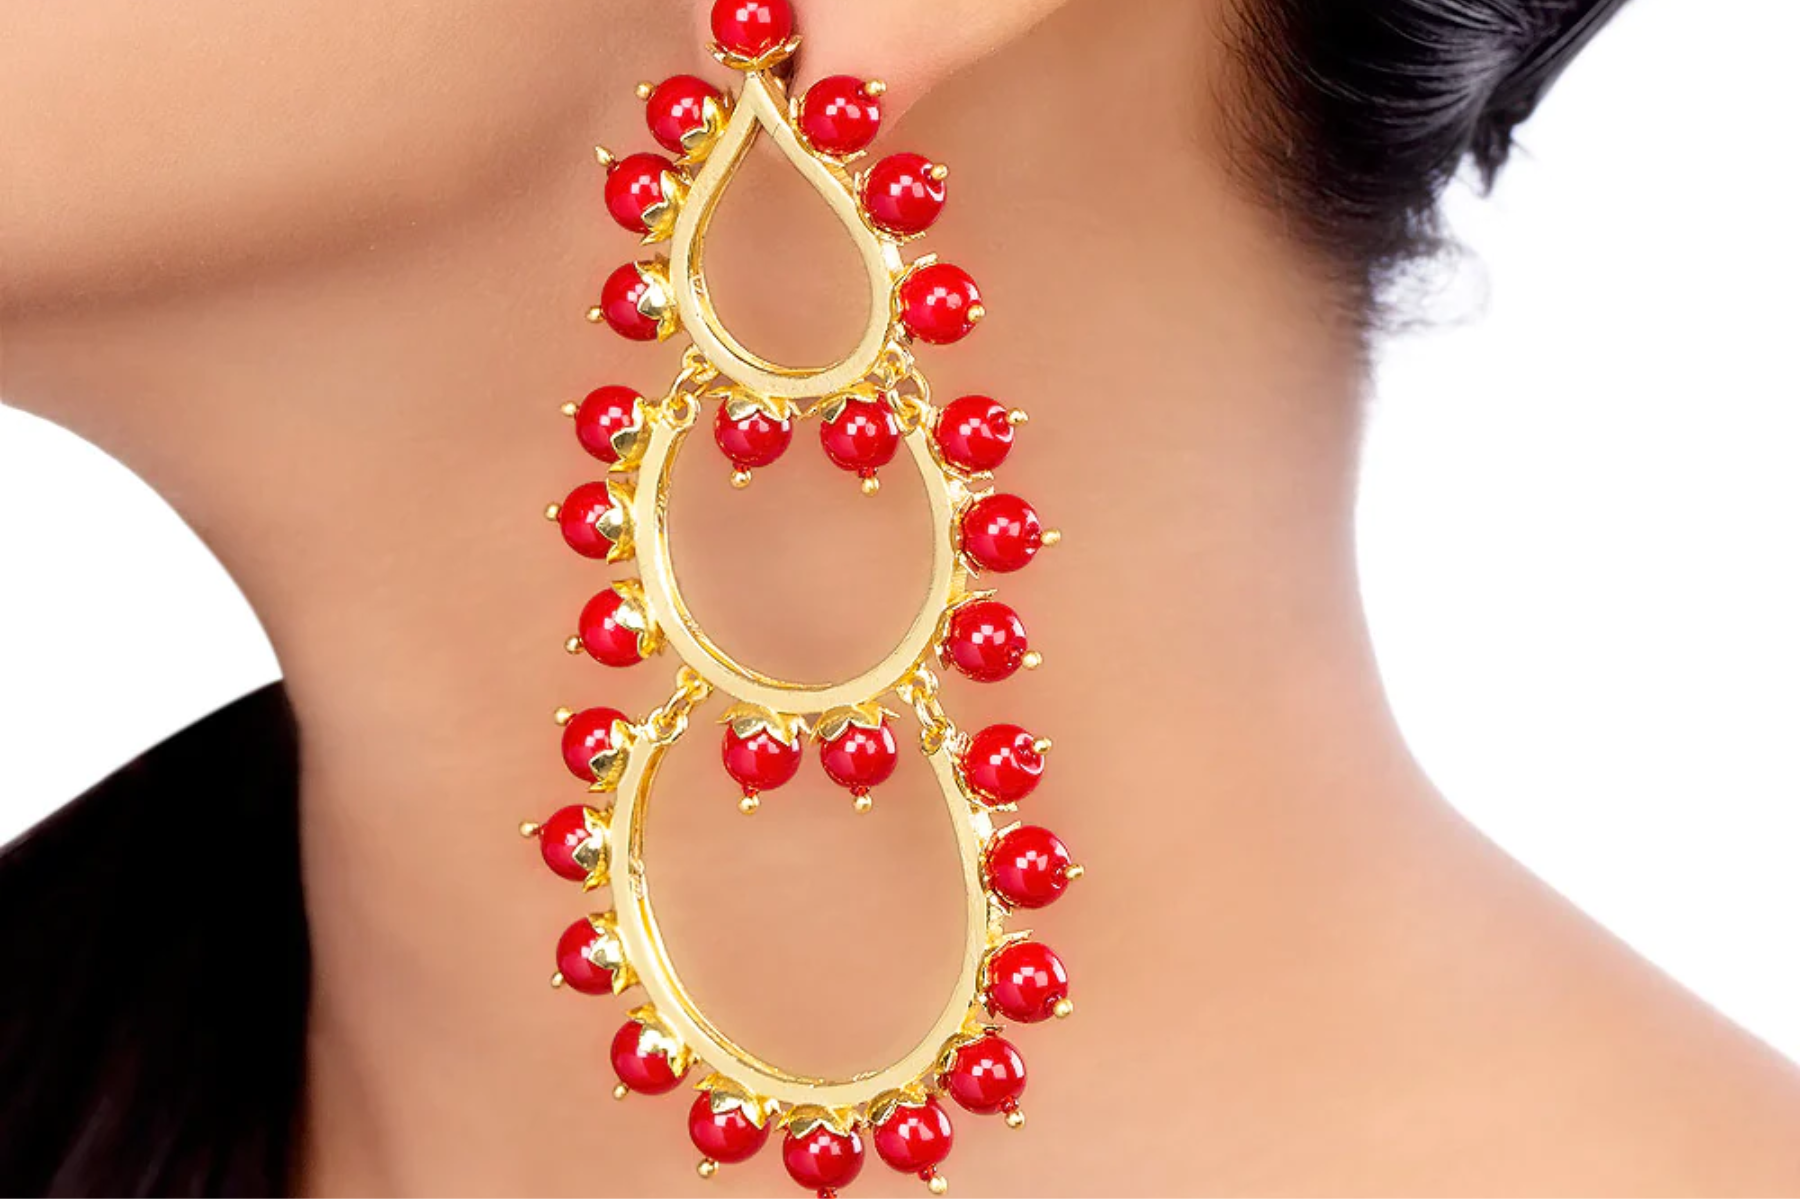 A woman sporting red jewels with gold earrings